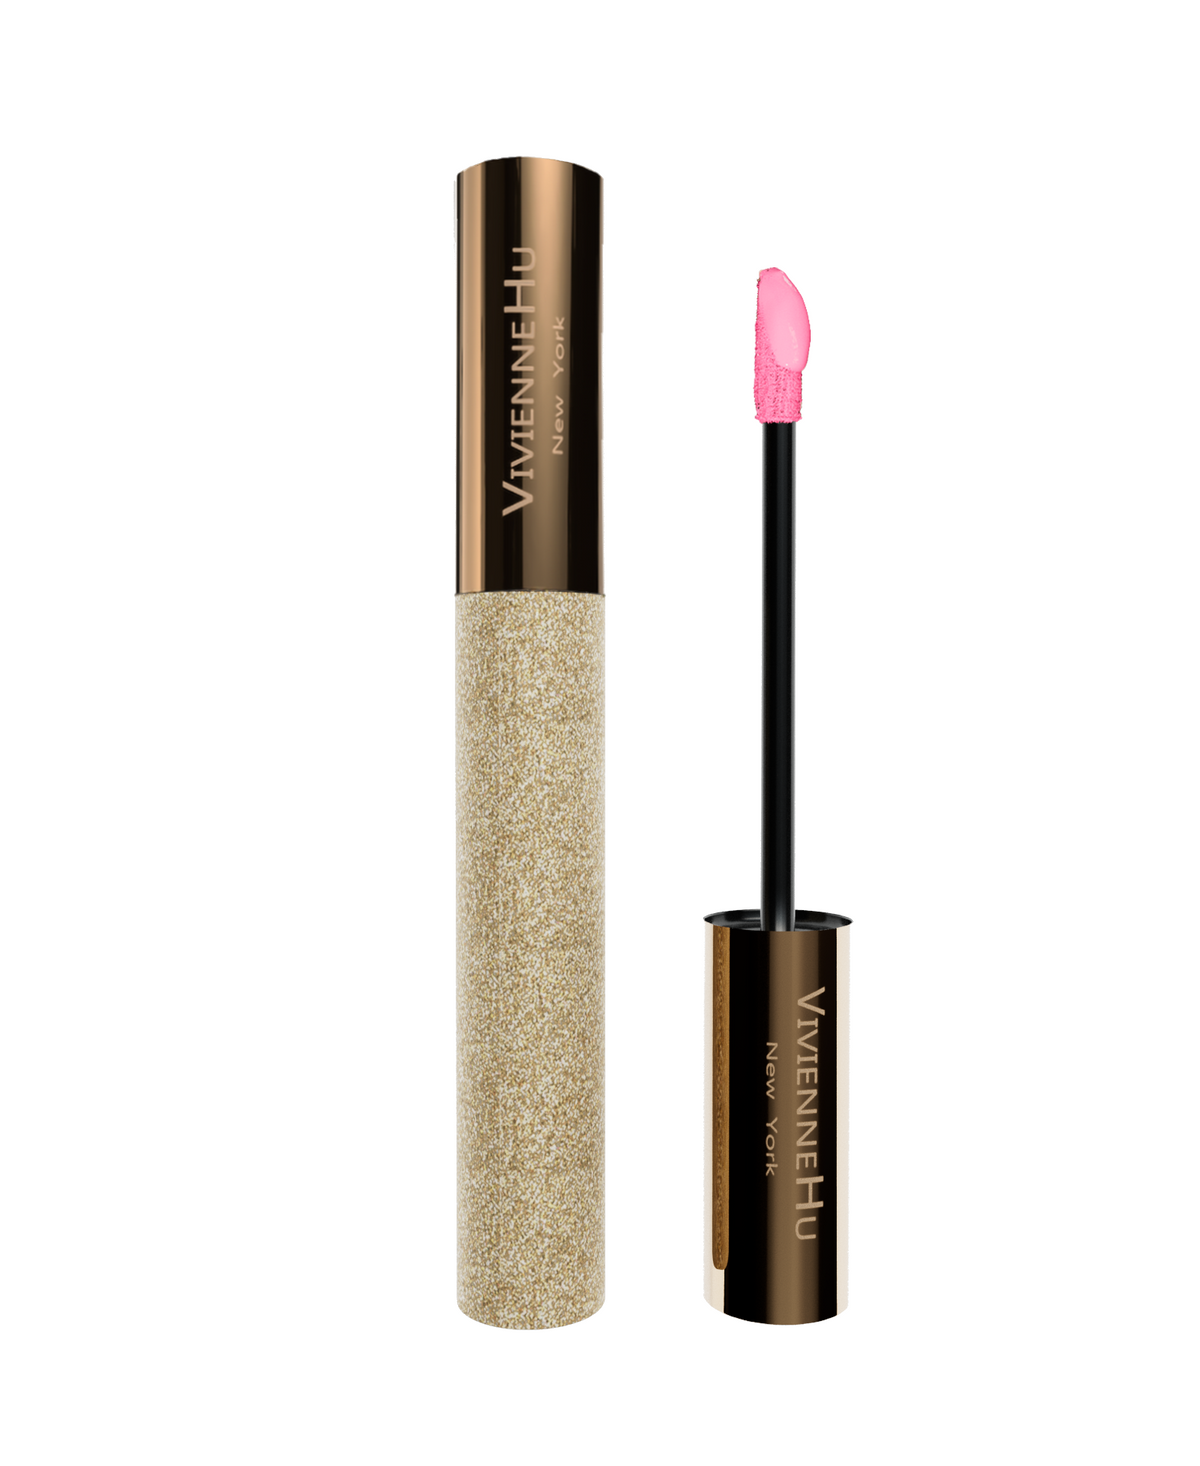 GOLDSAND LONG-TERM HYDRATION EFFECT LIP PLUMPING GLOSS – WITH HYALURONIC ACID|807 CONNFETTIPINK